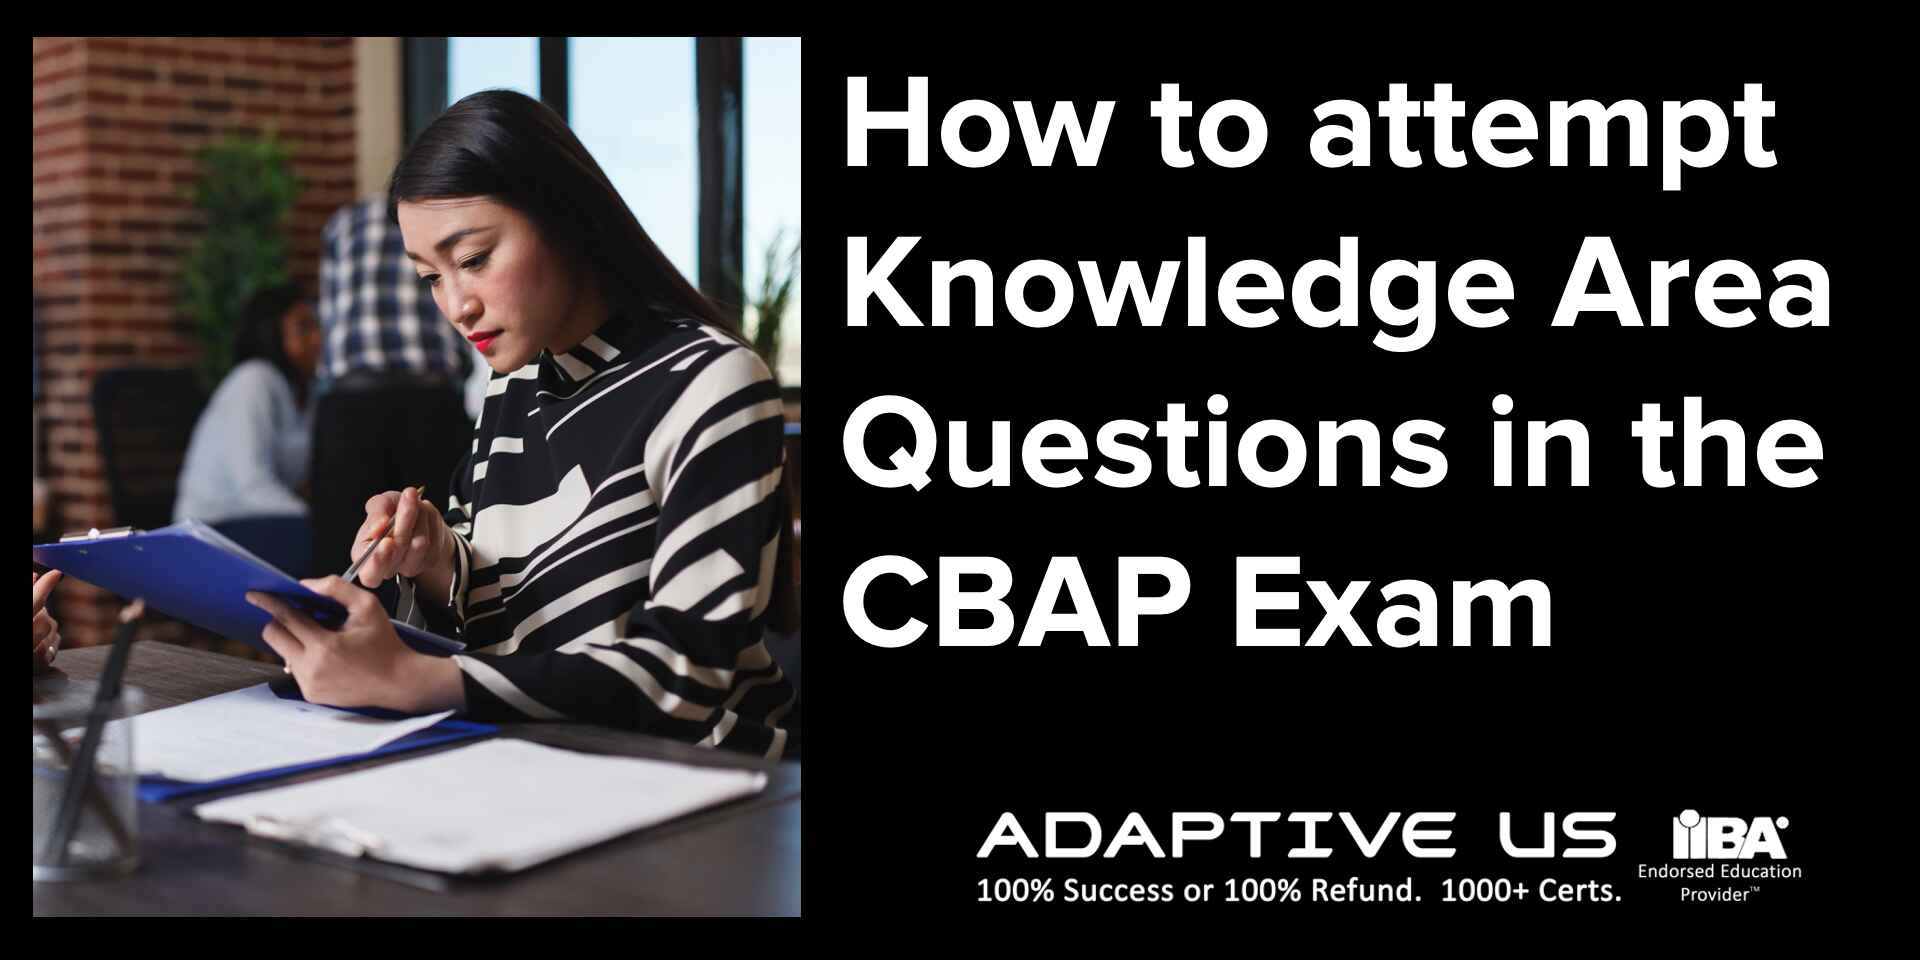 How to Attempt Knowledge Area Questions in the CBAP Exam